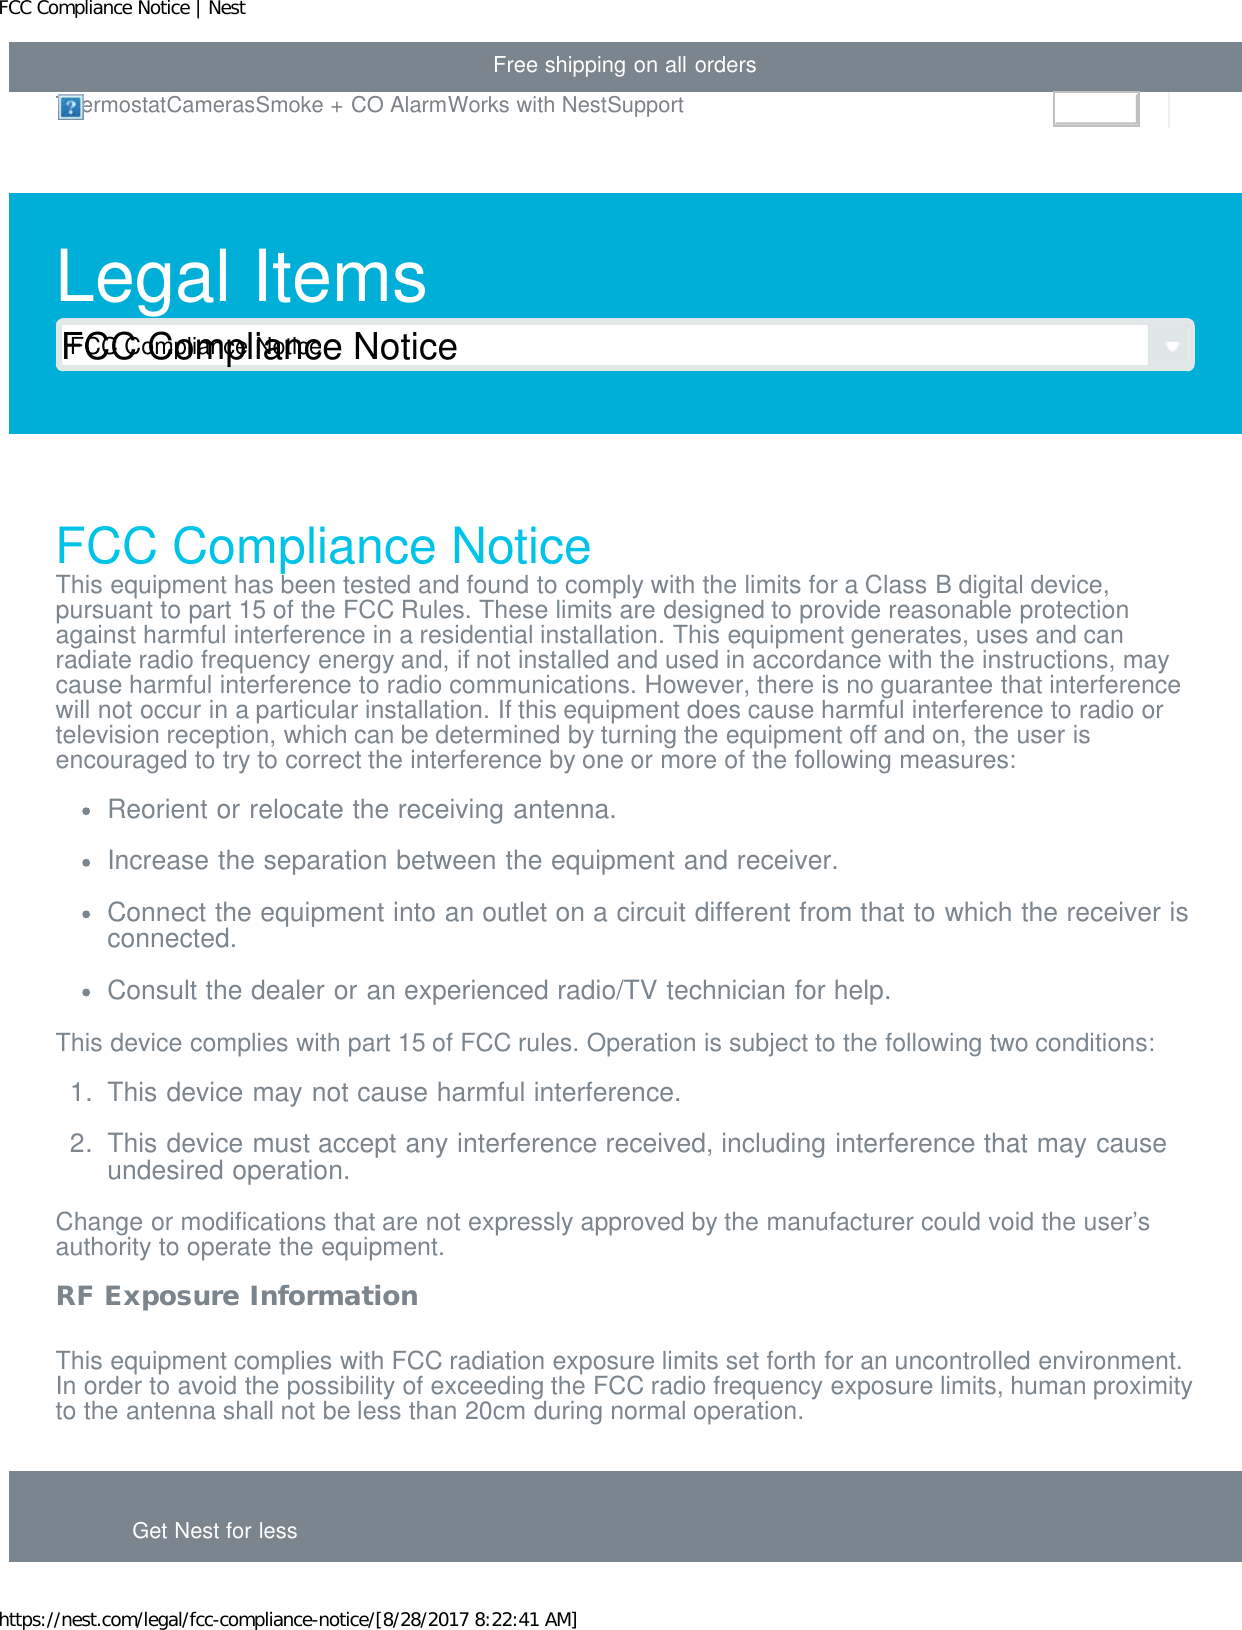 FCC Compliance Notice | Nesthttps://nest.com/legal/fcc-compliance-notice/[8/28/2017 8:22:41 AM]Free shipping on all ordersLegal ItemsFCC Compliance NoticeFCC Compliance NoticeThis equipment has been tested and found to comply with the limits for a Class B digital device,pursuant to part 15 of the FCC Rules. These limits are designed to provide reasonable protectionagainst harmful interference in a residential installation. This equipment generates, uses and canradiate radio frequency energy and, if not installed and used in accordance with the instructions, maycause harmful interference to radio communications. However, there is no guarantee that interferencewill not occur in a particular installation. If this equipment does cause harmful interference to radio ortelevision reception, which can be determined by turning the equipment off and on, the user isencouraged to try to correct the interference by one or more of the following measures:Reorient or relocate the receiving antenna.Increase the separation between the equipment and receiver.Connect the equipment into an outlet on a circuit different from that to which the receiver isconnected.Consult the dealer or an experienced radio/TV technician for help.This device complies with part 15 of FCC rules. Operation is subject to the following two conditions:1.  This device may not cause harmful interference.2.  This device must accept any interference received, including interference that may causeundesired operation.Change or modifications that are not expressly approved by the manufacturer could void the user’sauthority to operate the equipment.RF Exposure InformationThis equipment complies with FCC radiation exposure limits set forth for an uncontrolled environment.In order to avoid the possibility of exceeding the FCC radio frequency exposure limits, human proximityto the antenna shall not be less than 20cm during normal operation.Get Nest for lessThermostatCamerasSmoke + CO AlarmWorks with NestSupportSign inFCC Compliance Notice